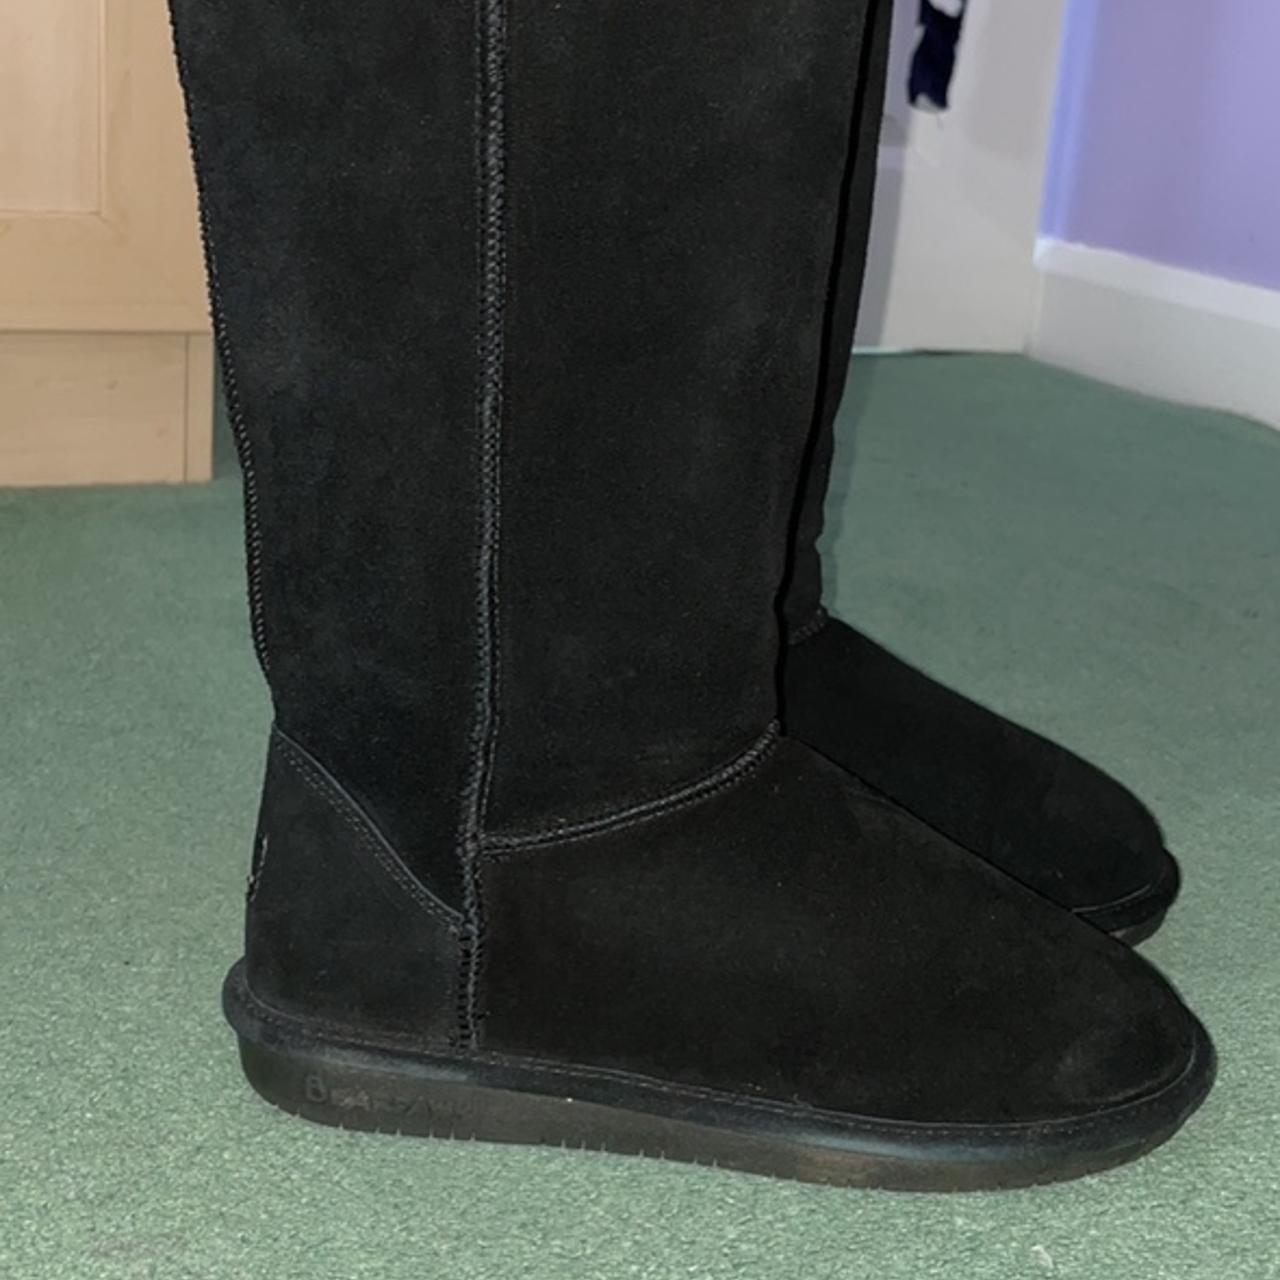 Bearpaw ugg styled boots UK Size 7 Worn once or... - Depop